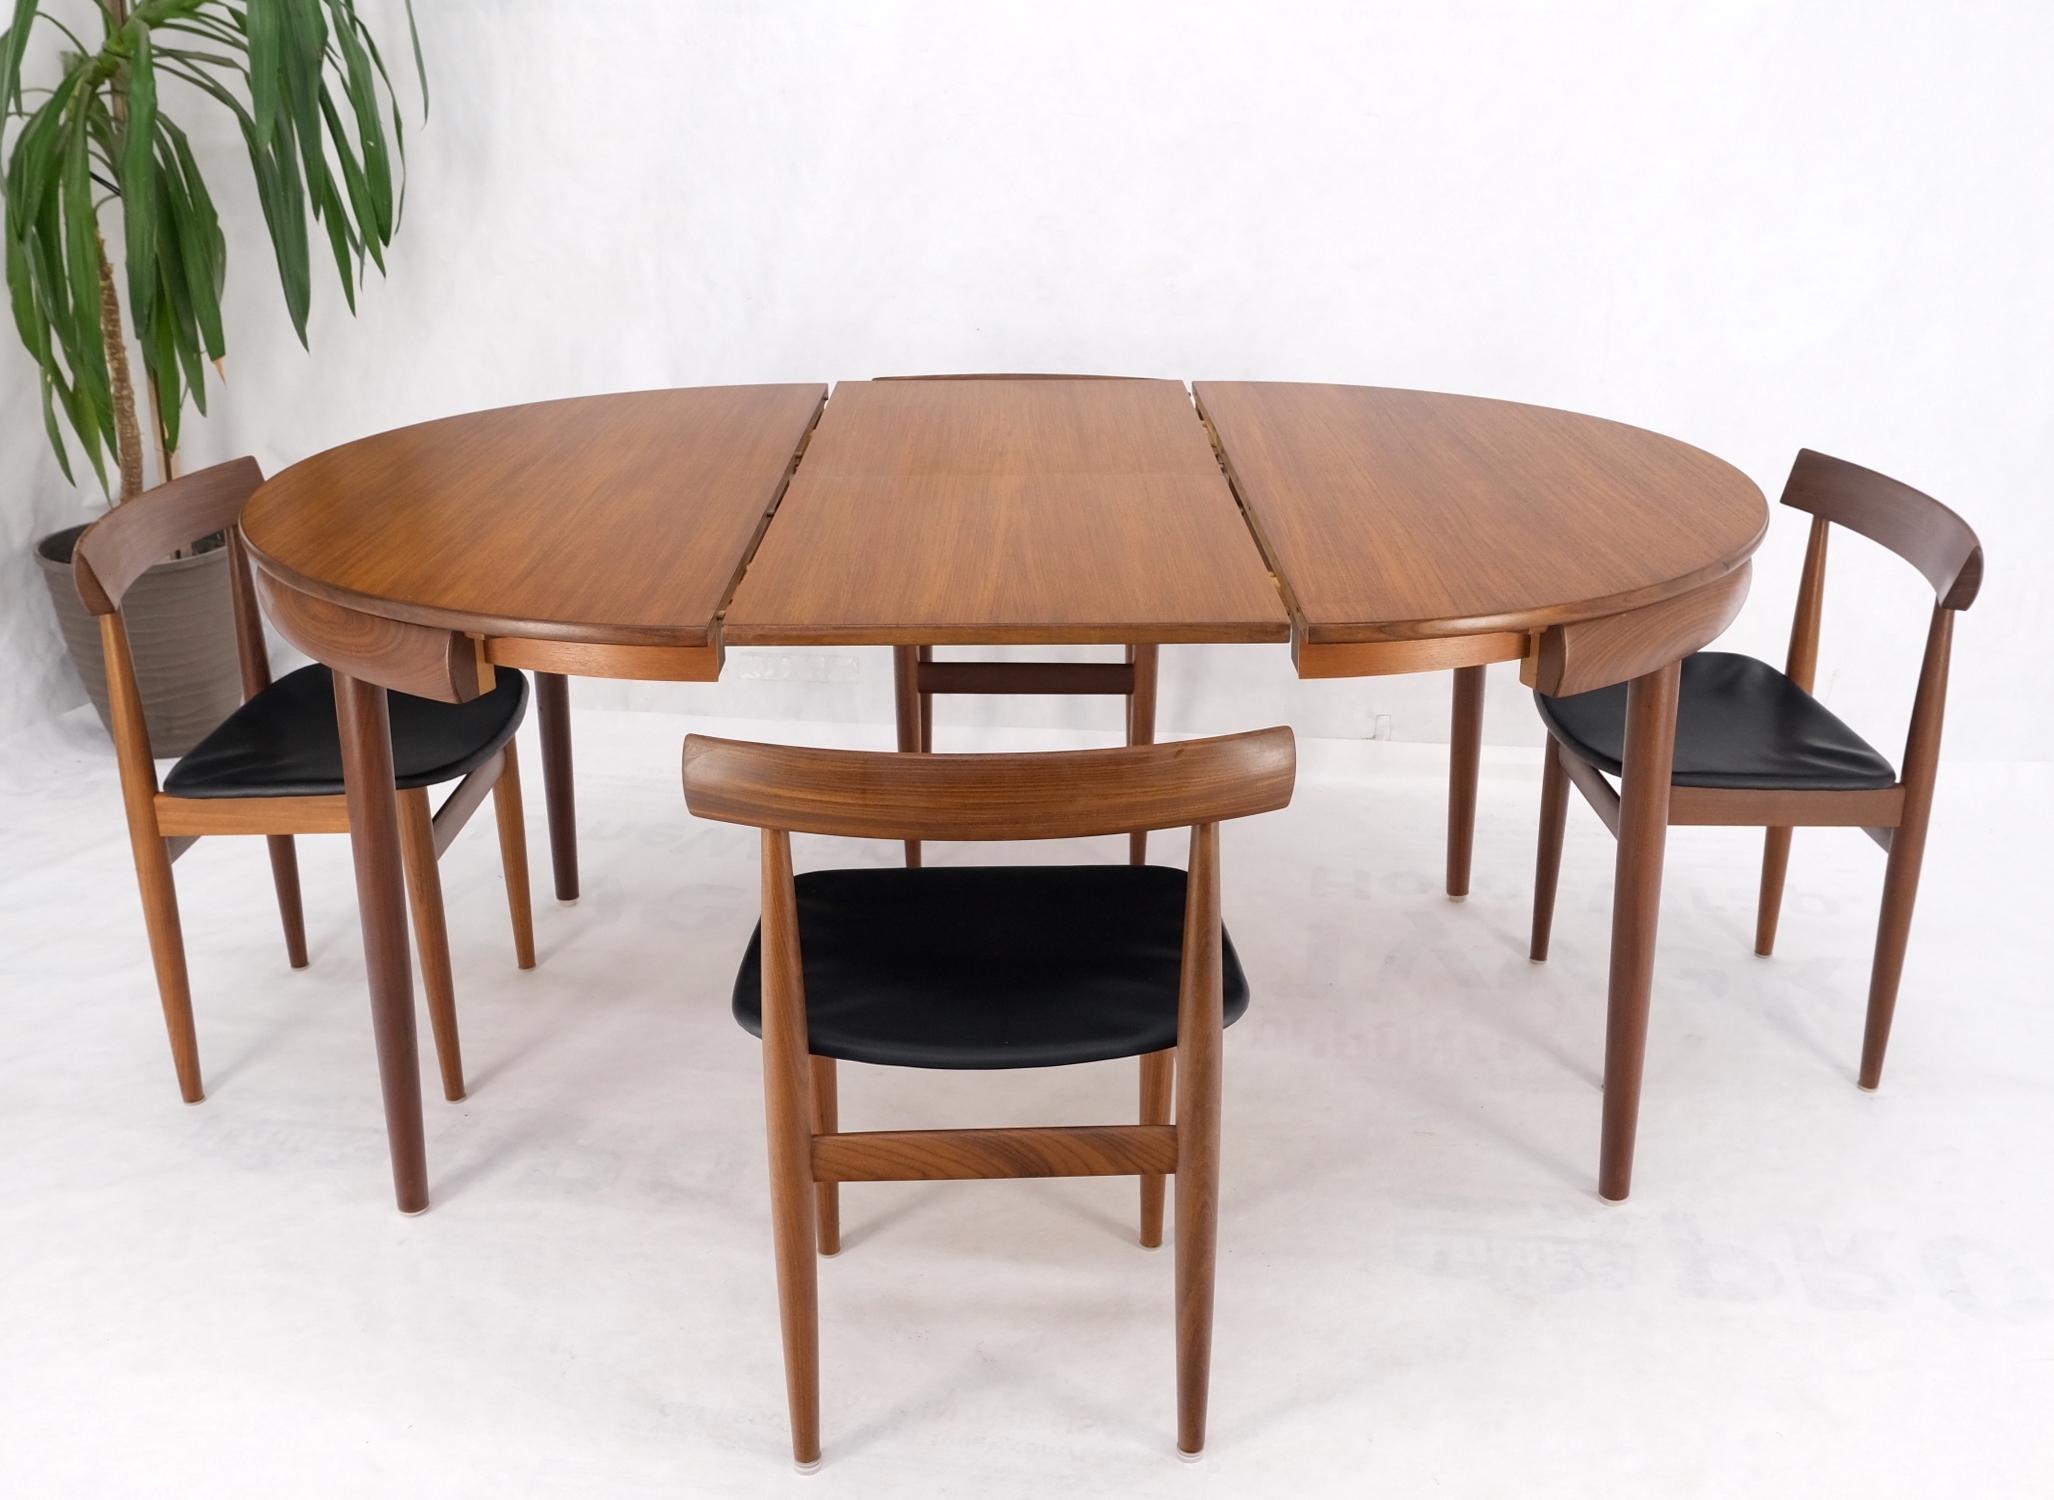 4 nNesting chairs Hans Olsen Frem Røjle round danish teak dining table leaf mint!
Table leaf measures 20 inches wide
Four chairs measuring 16'' D x 18'' W x 28'' H and 17.5'' seat height.